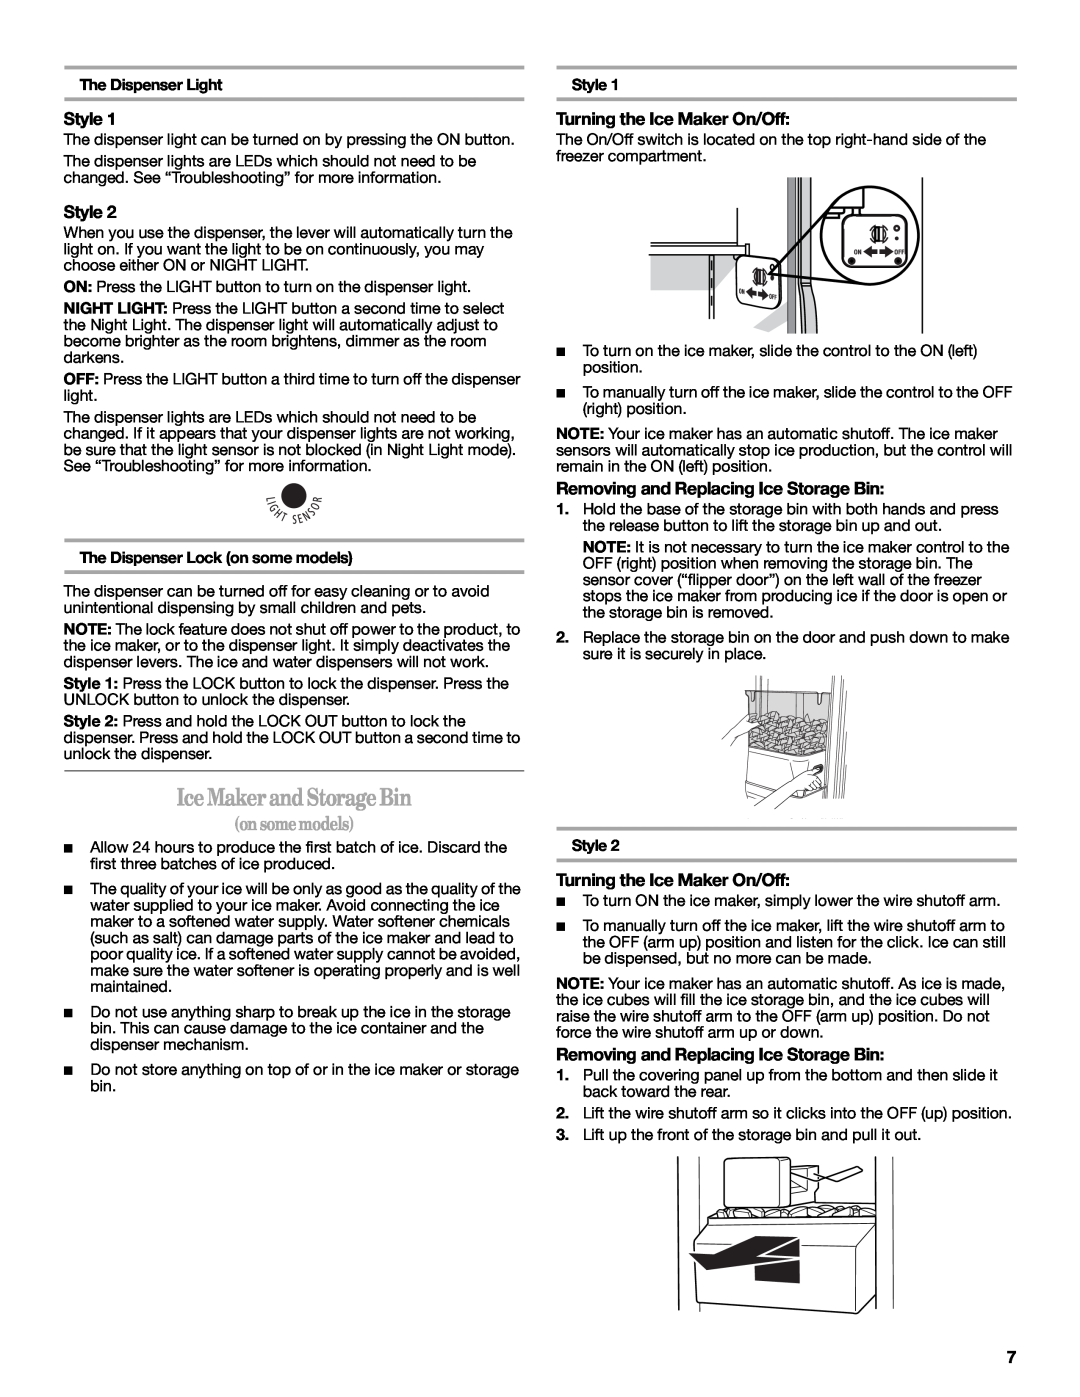 Whirlpool W10346247A Ice Maker and Storage Bin, Turning the Ice Maker On/Off, Removing and Replacing Ice Storage Bin 